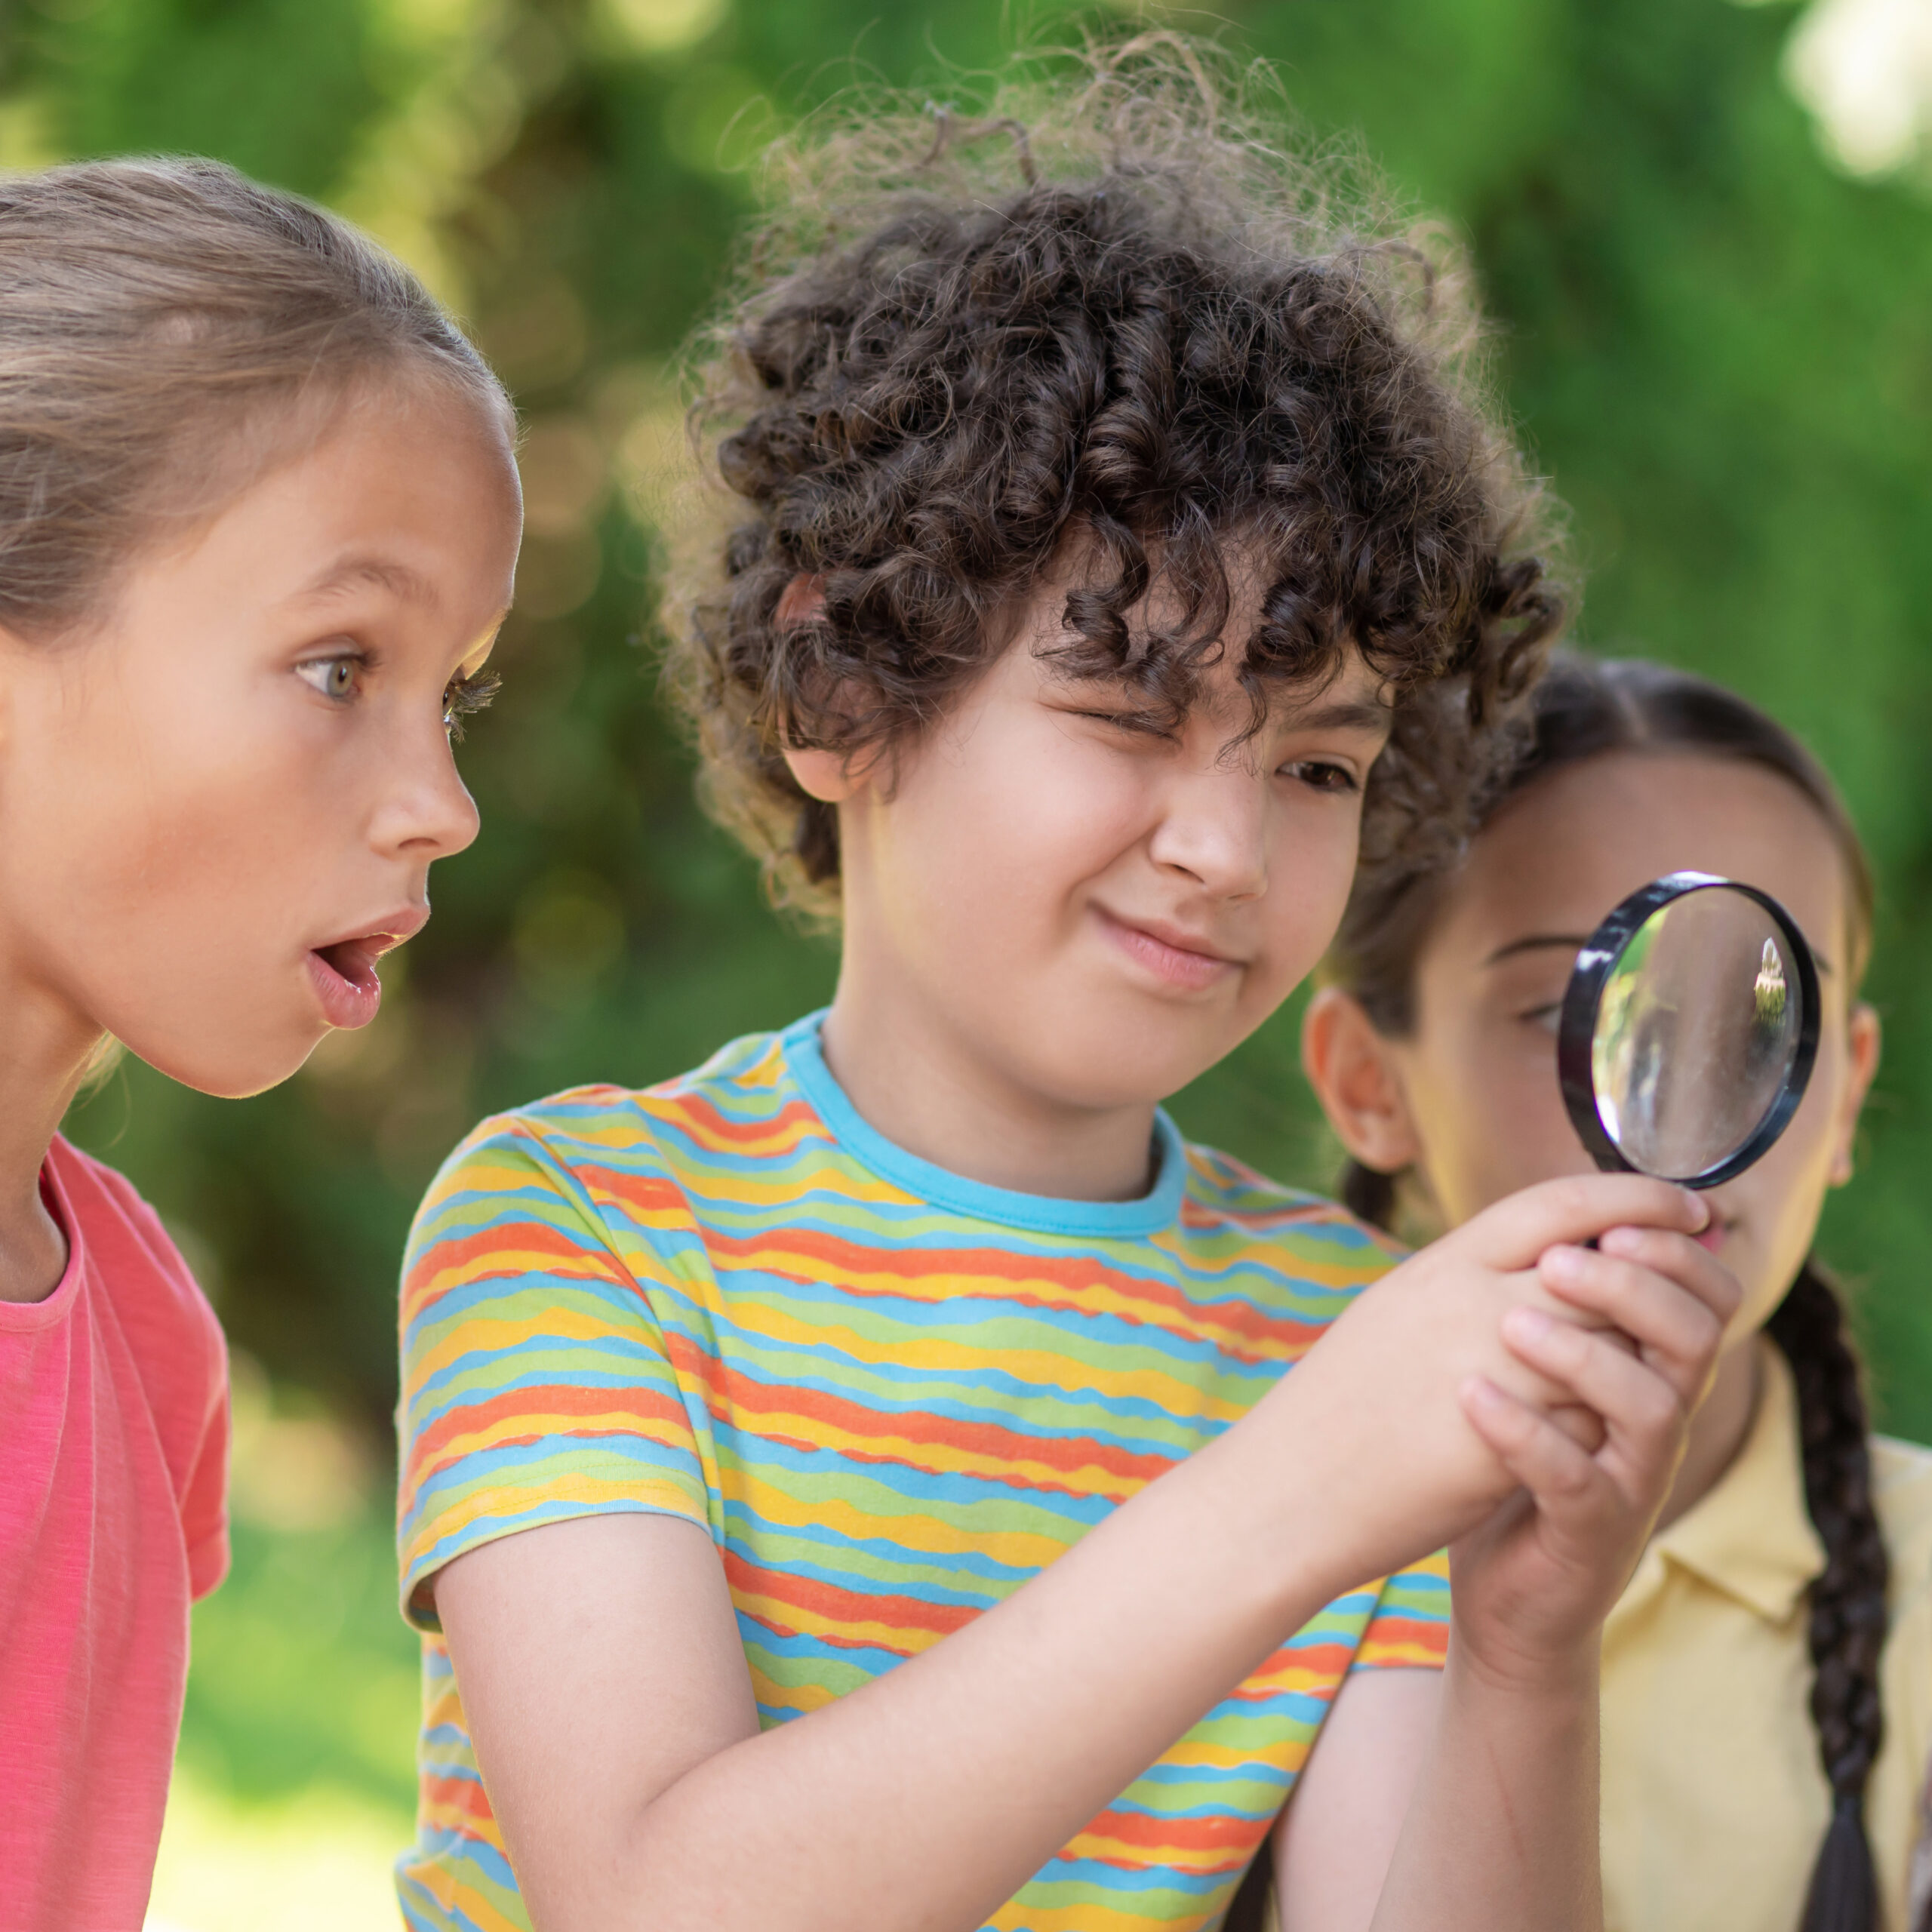 Kids looking through a magnifying glass